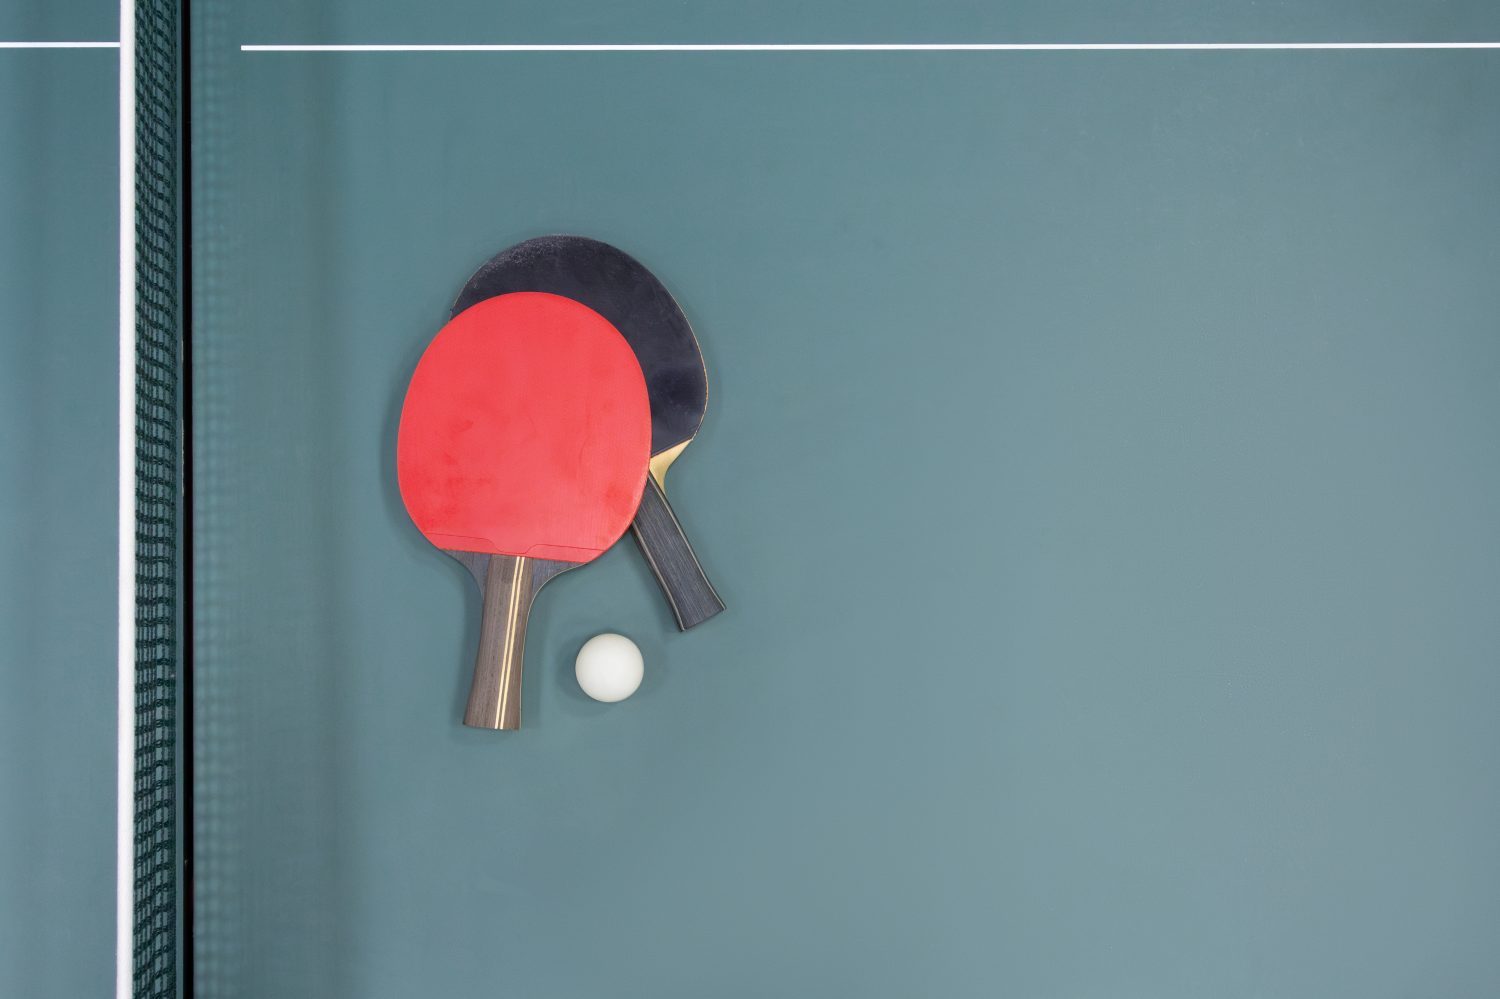 Table tennis ball and two rackets on the table. Top view - stock photo